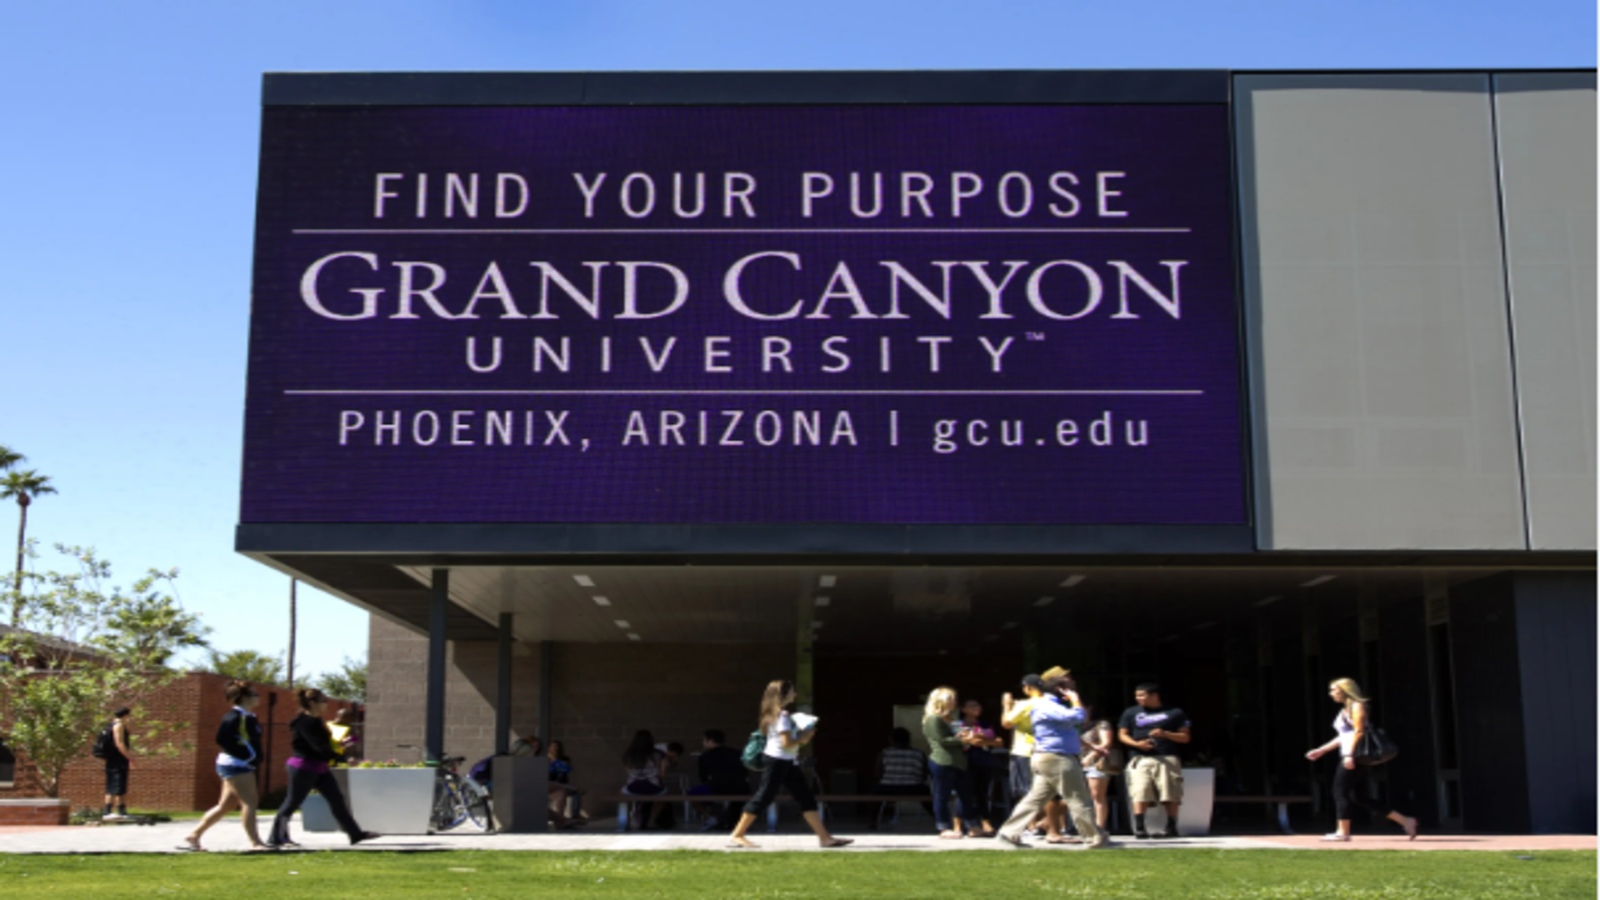 Grand Canyon University – Find Your Purpose and Achieve Your Potential